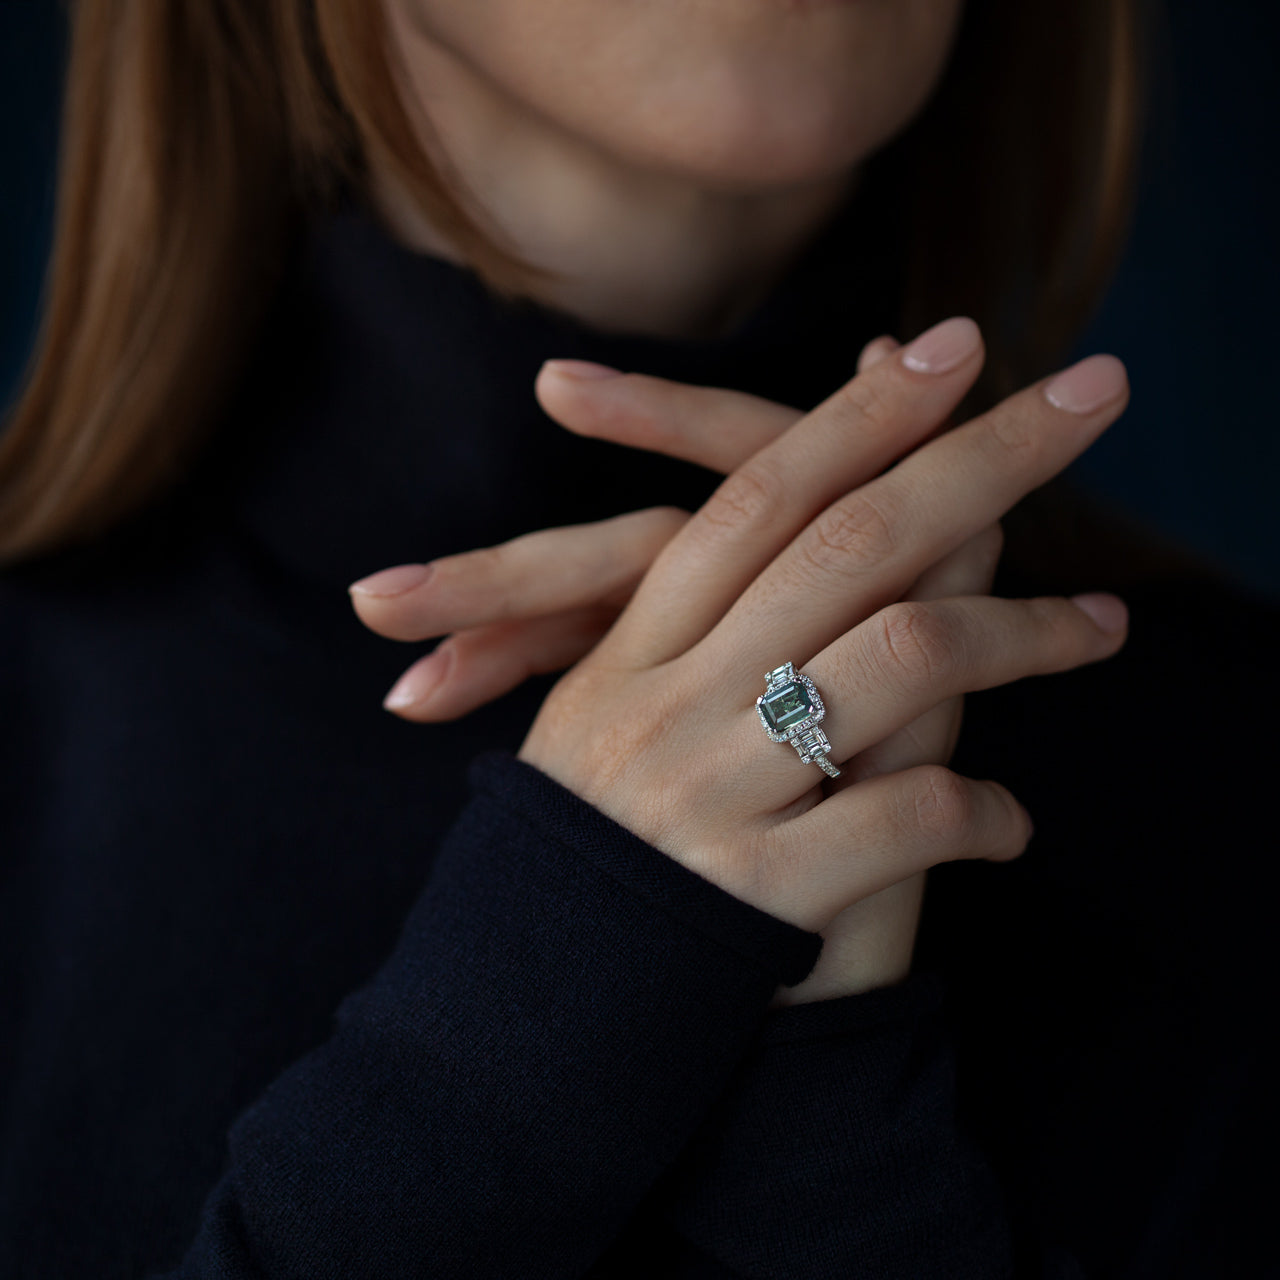 A woman's hand adorned with the 2.23ct alexandrite ring in 18k white gold, showcasing the stone's blue color in different light